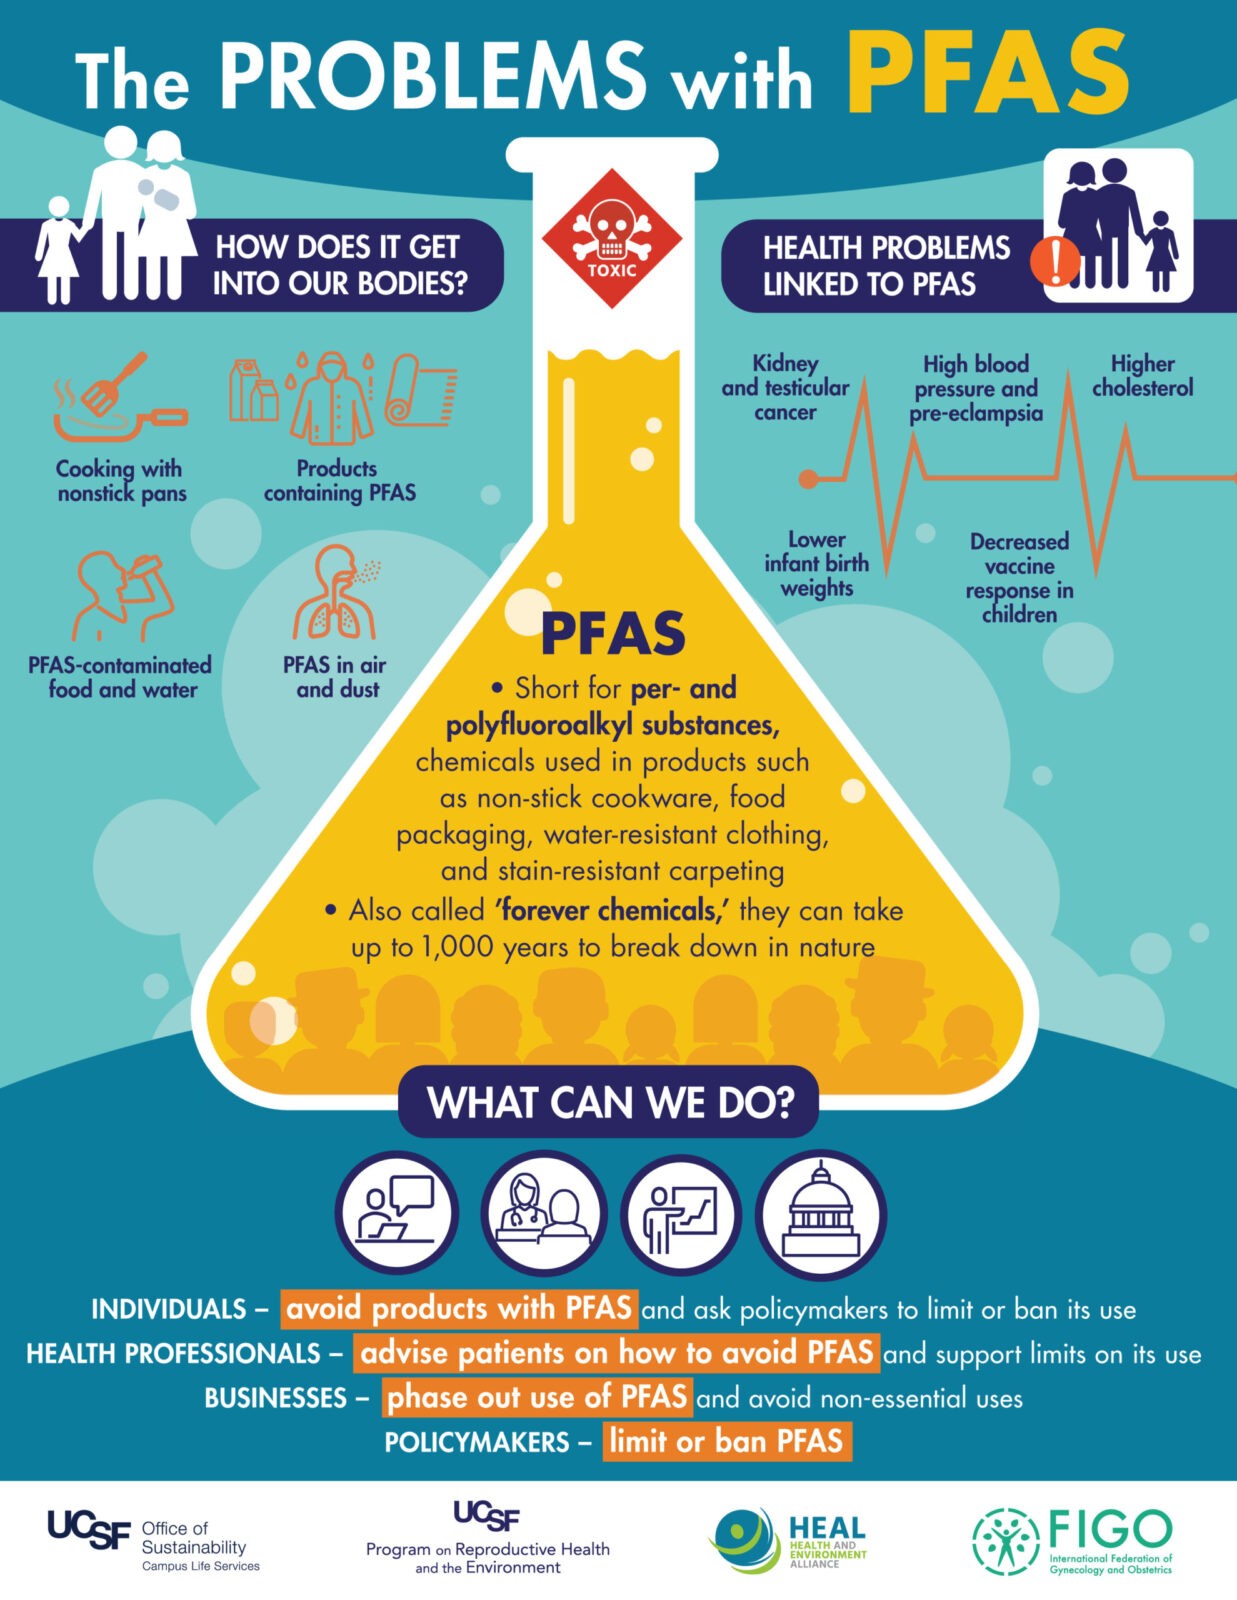 How PFAS chemicals affect women, pregnancy and human development: Health actors call for urgent action to phase them out